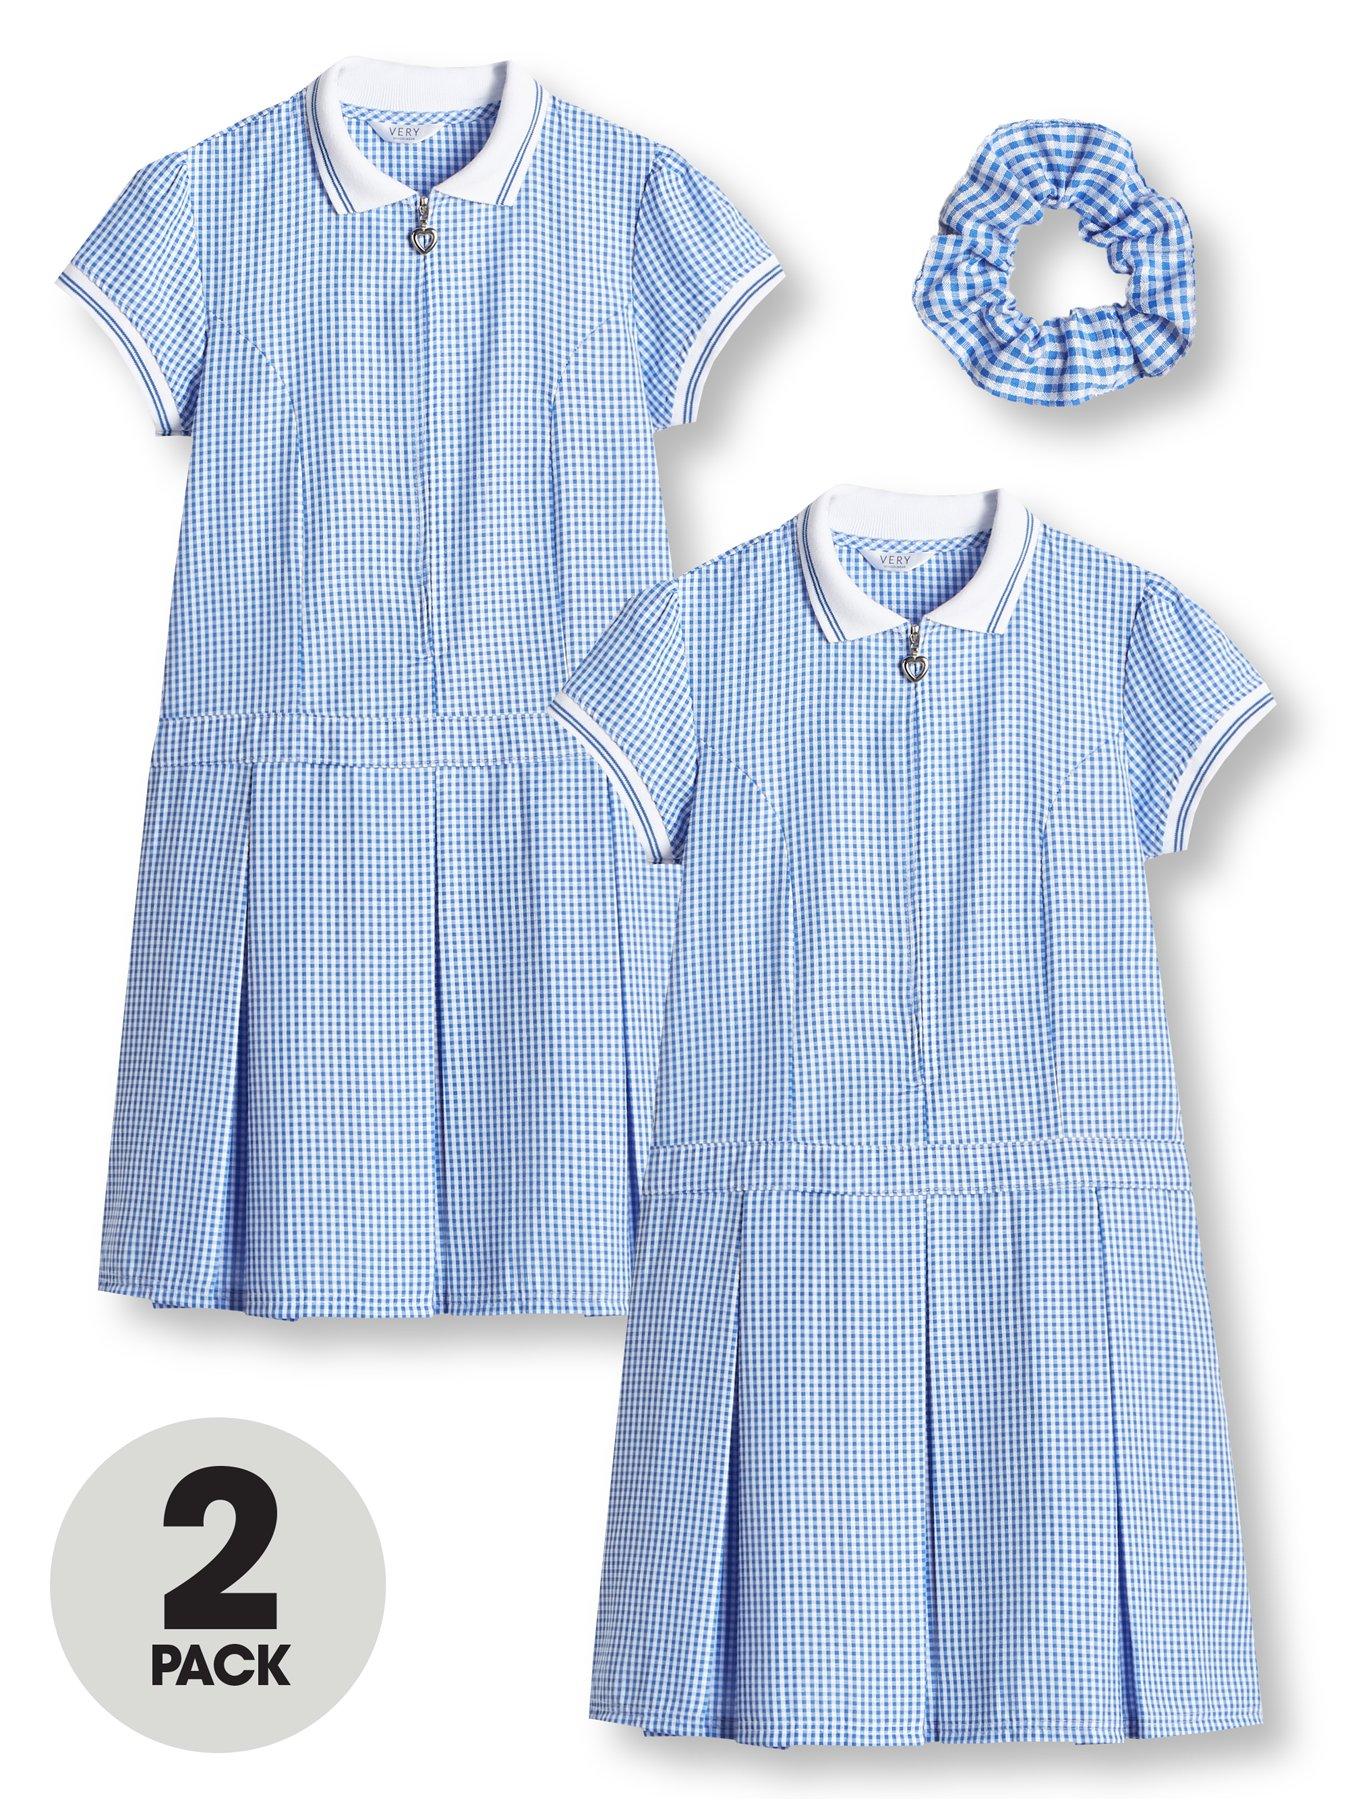 blue and white gingham school dress